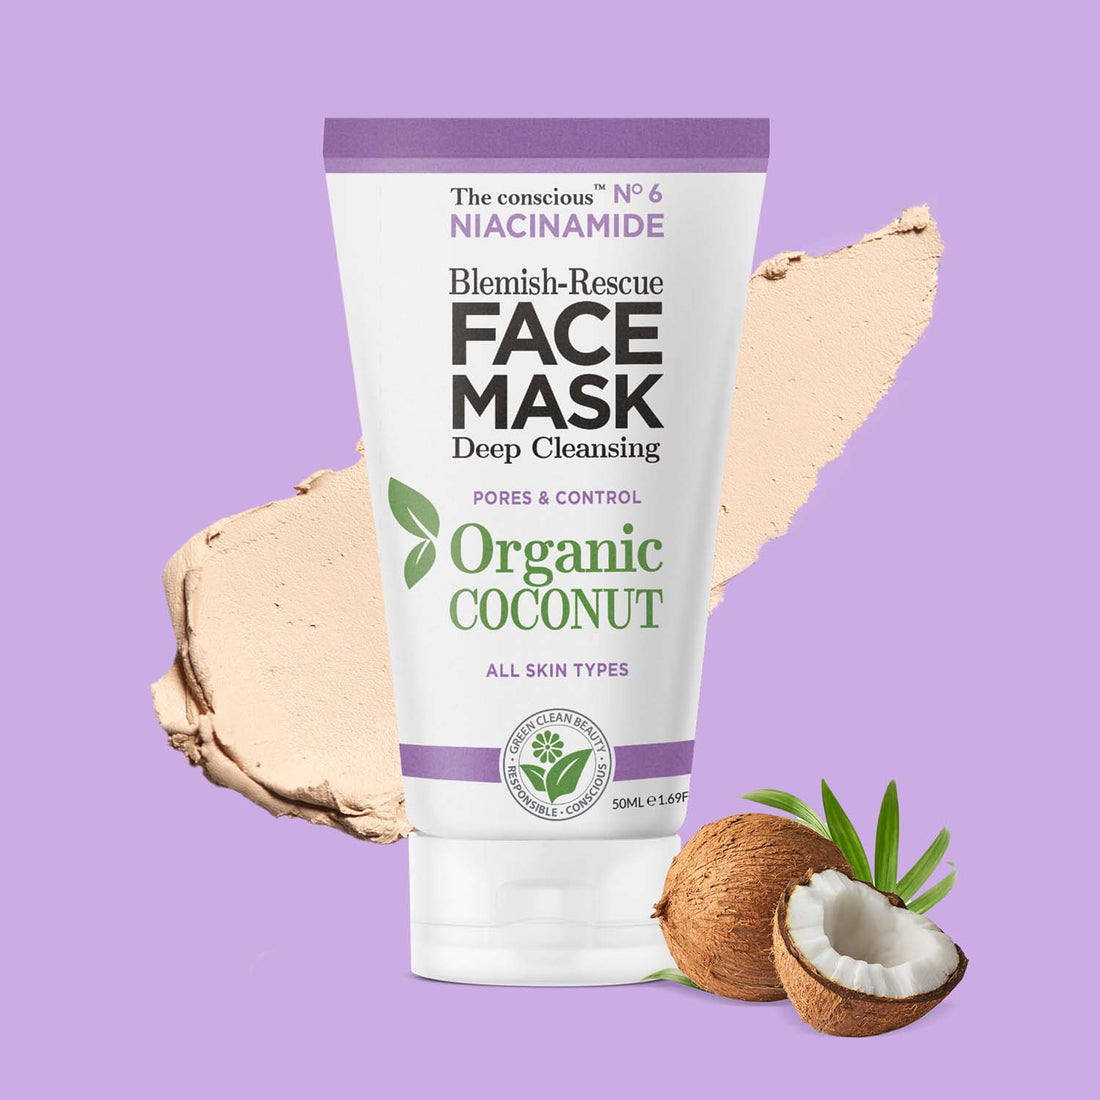 The conscious™ Niacinamide Blemish-Rescue Face Mask Organic Coconut